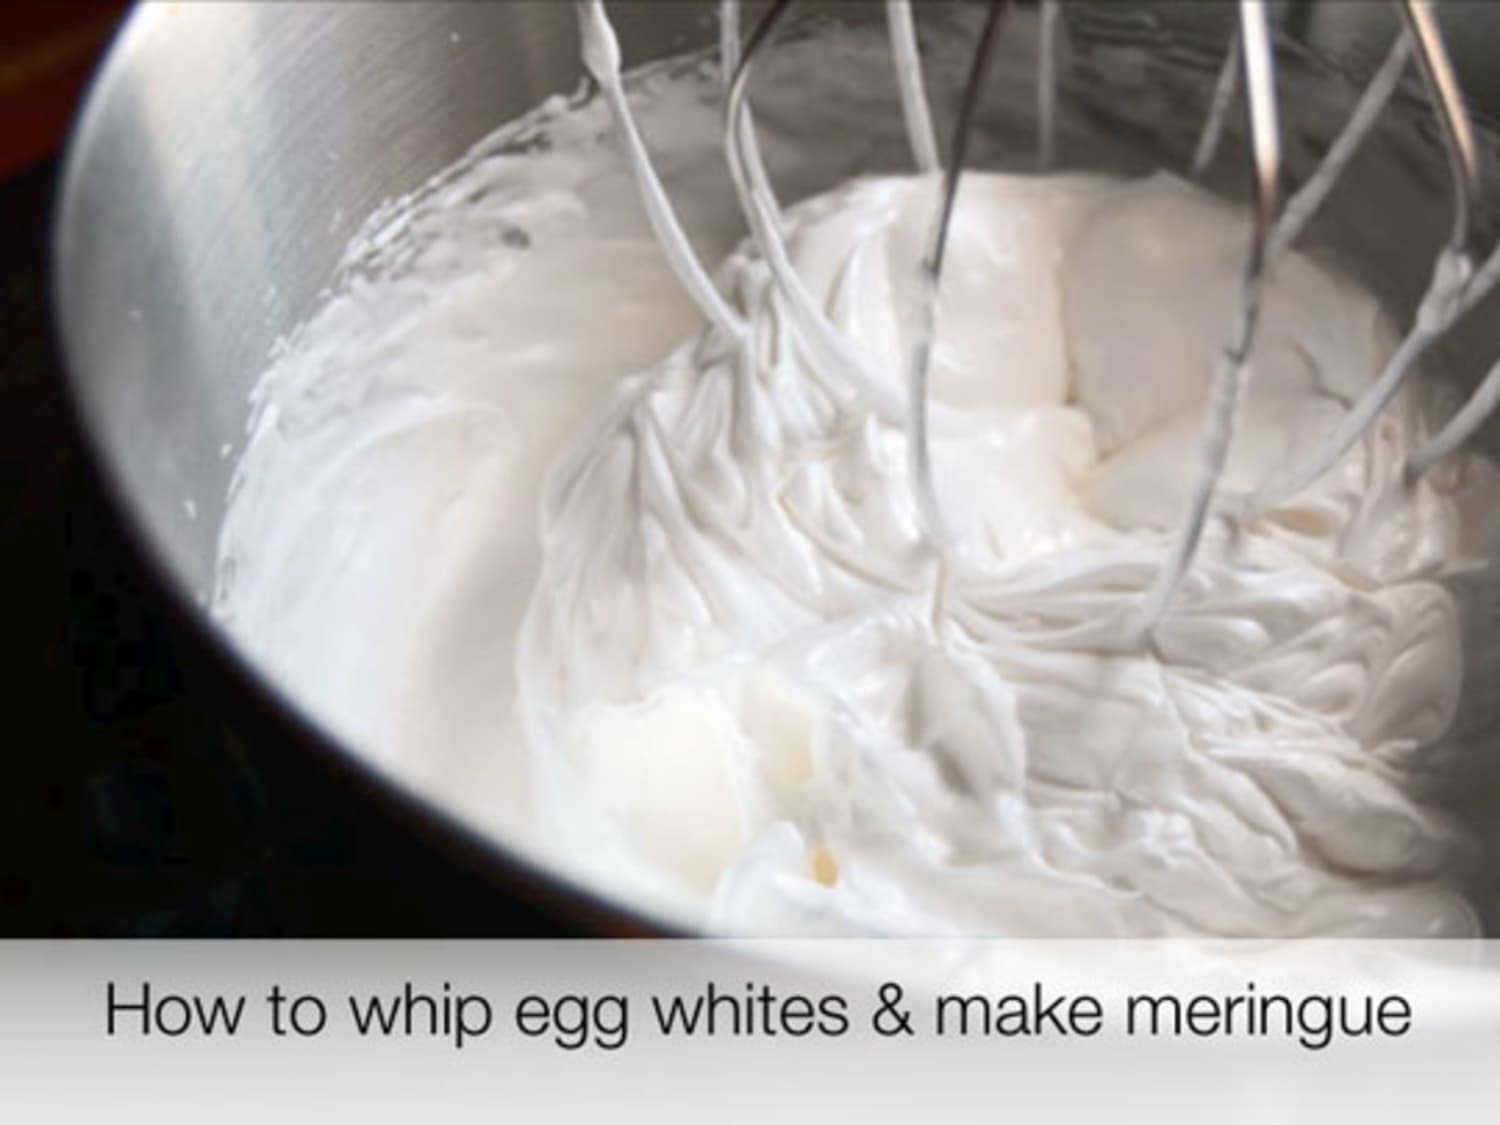 The Secret to Fluffy Egg White Cocktail Perfection